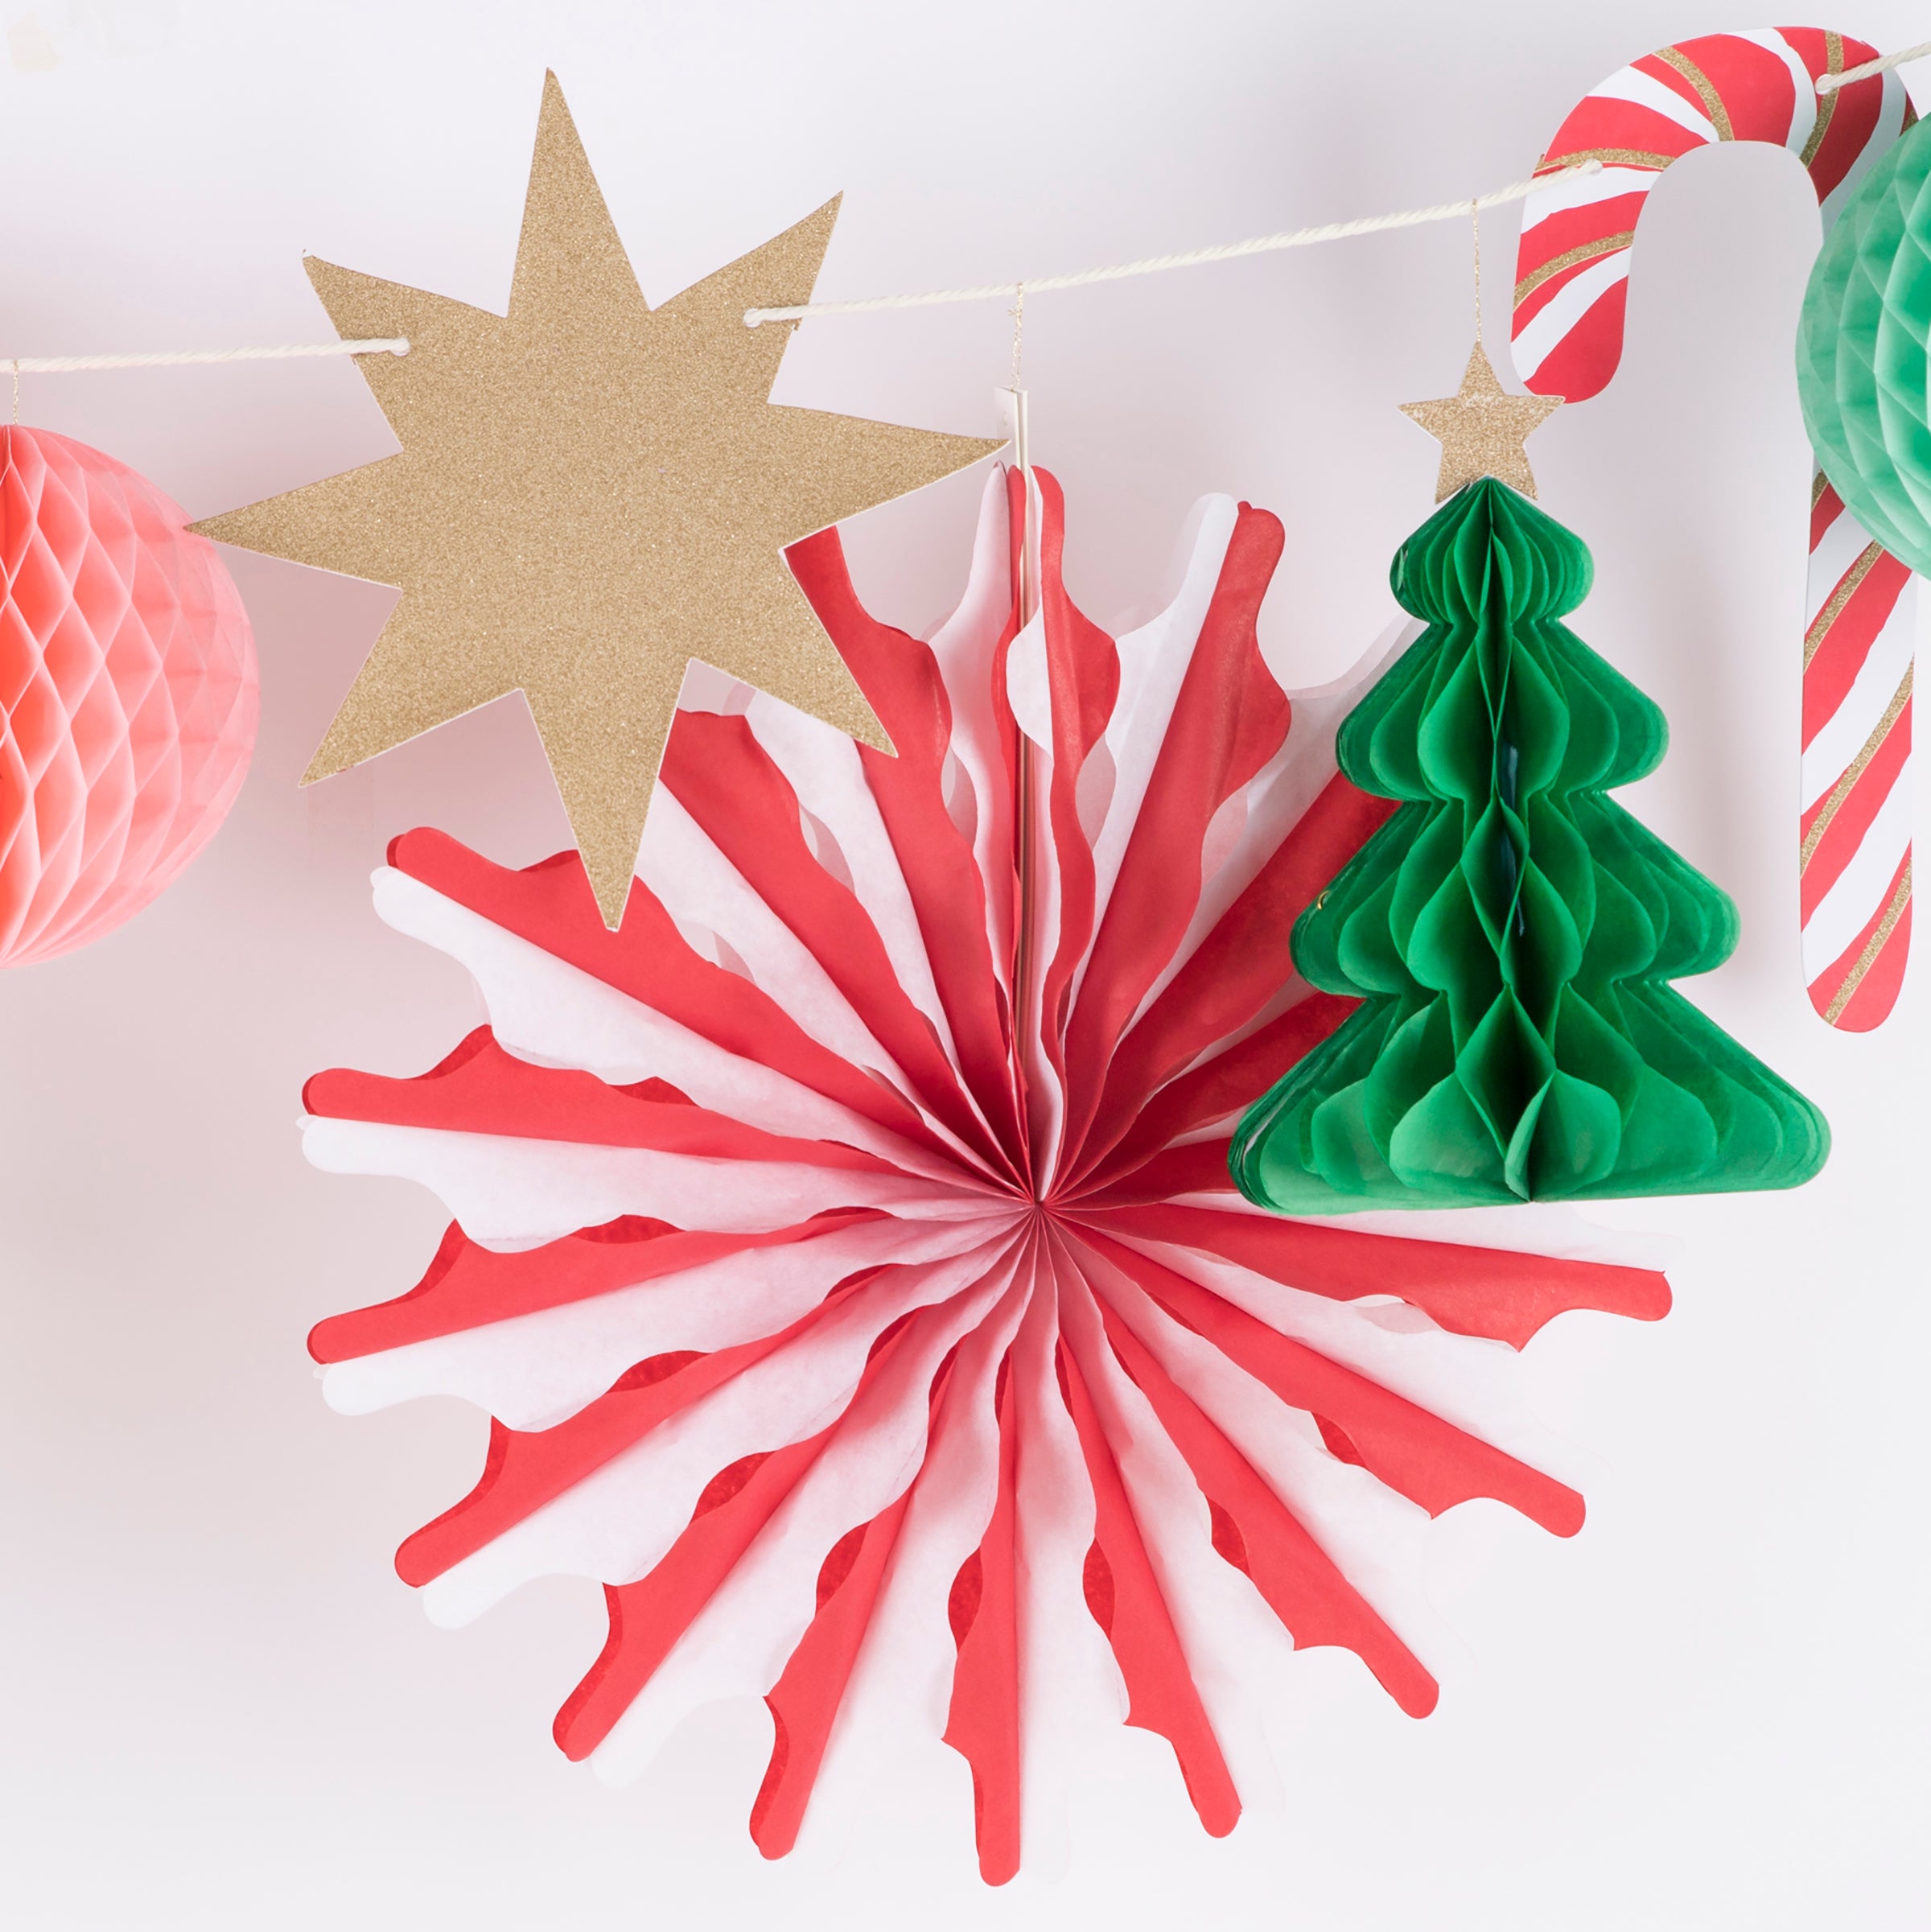 Our Christmas paper garland has 3D honeycomb decorations, stars and Christmas trees.